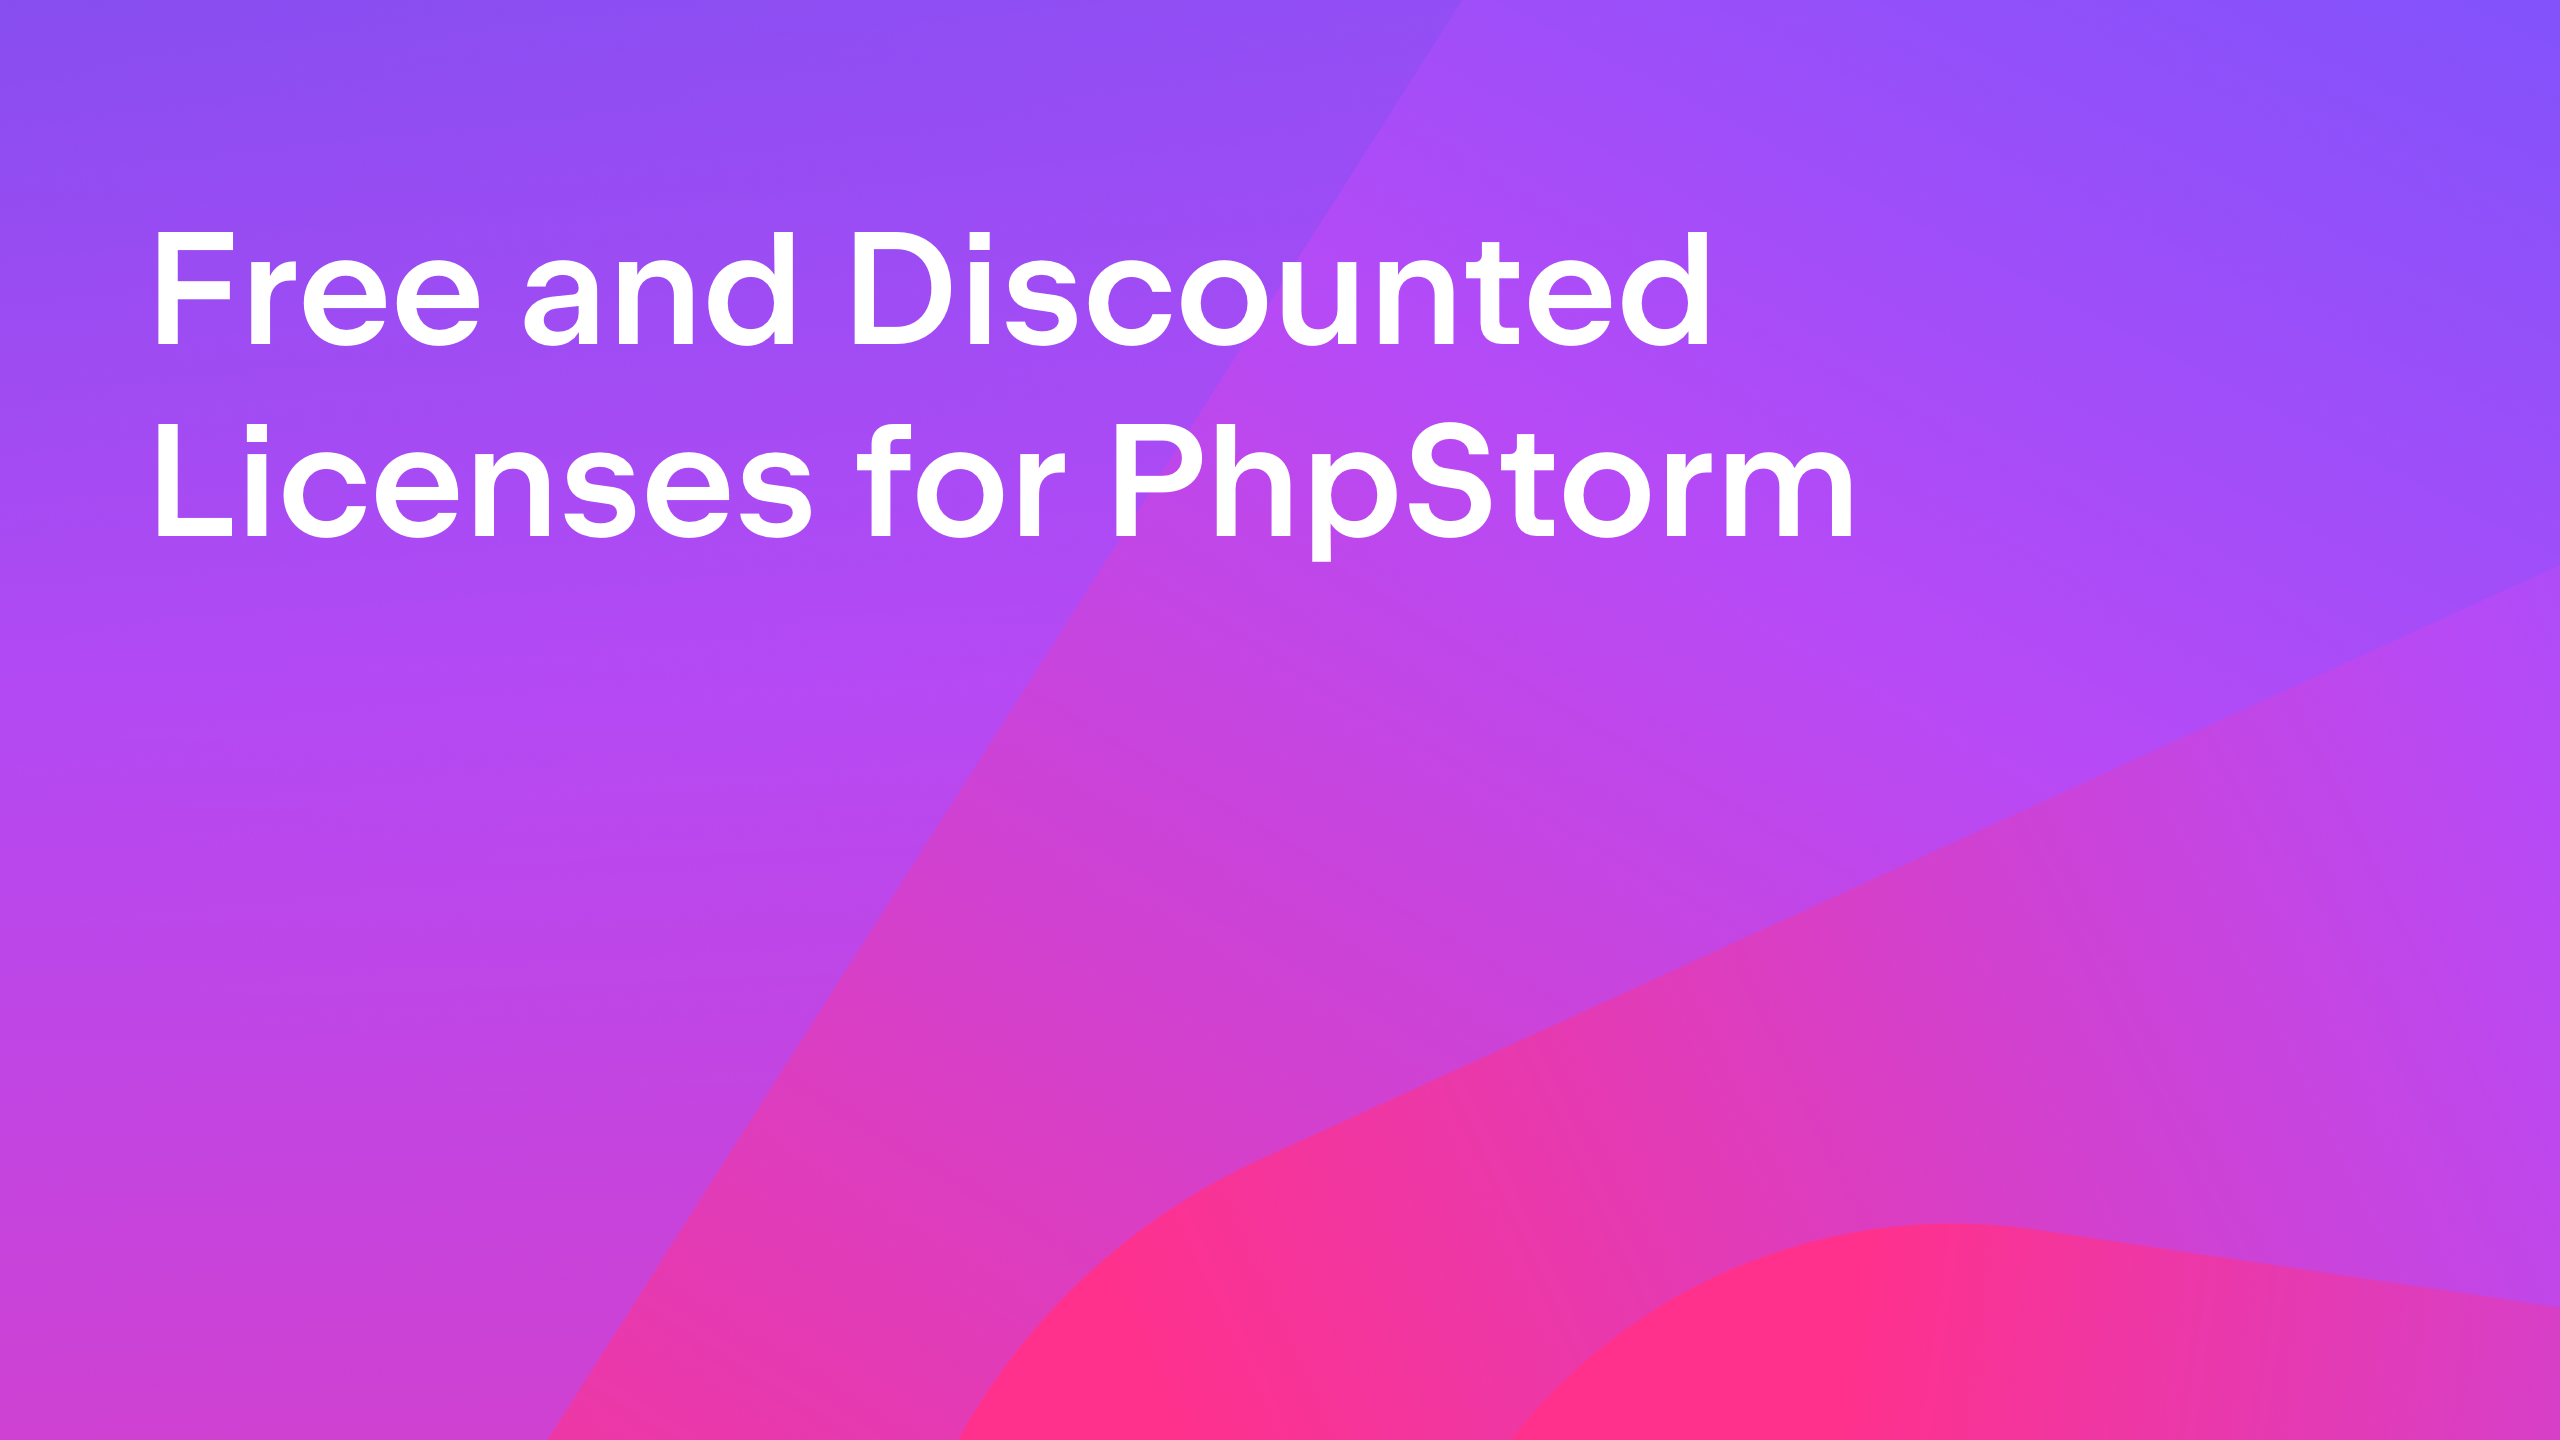 Free and Discounted Licenses for PhpStorm